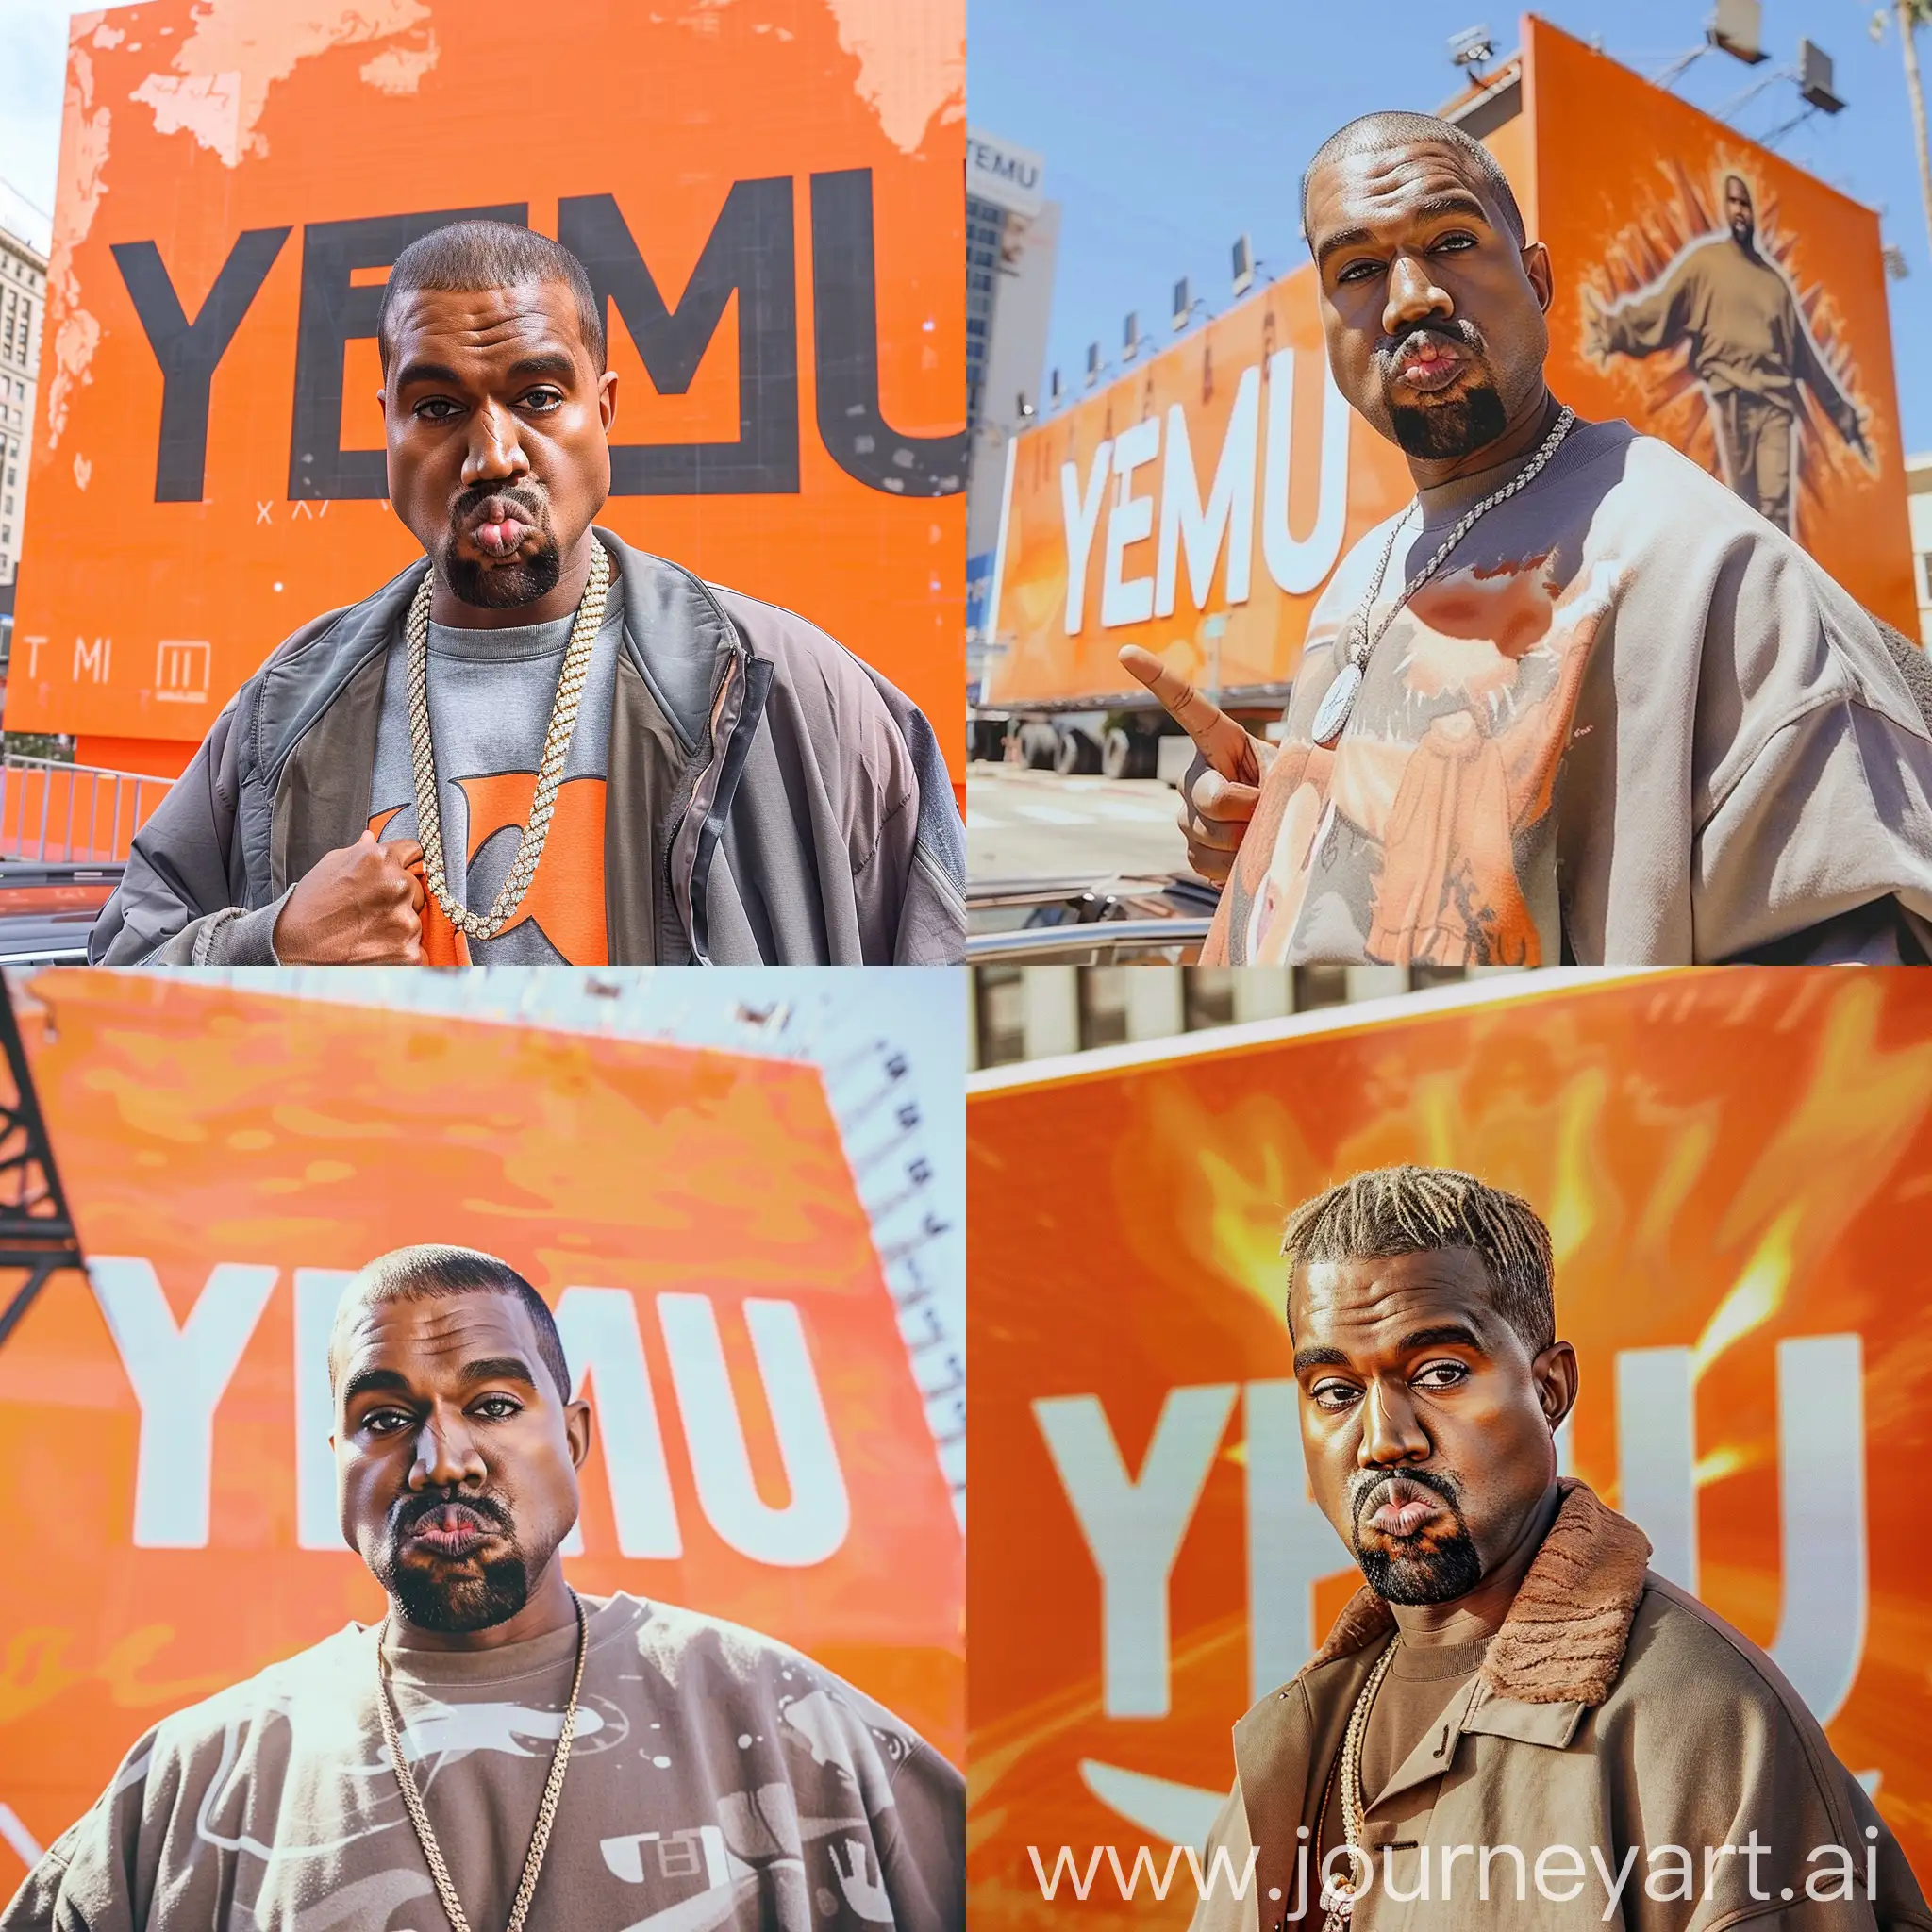 kanye west is making a pouty face, in front of a giant orange billboard that says "TEMU", he is wearing Yeezy clothes